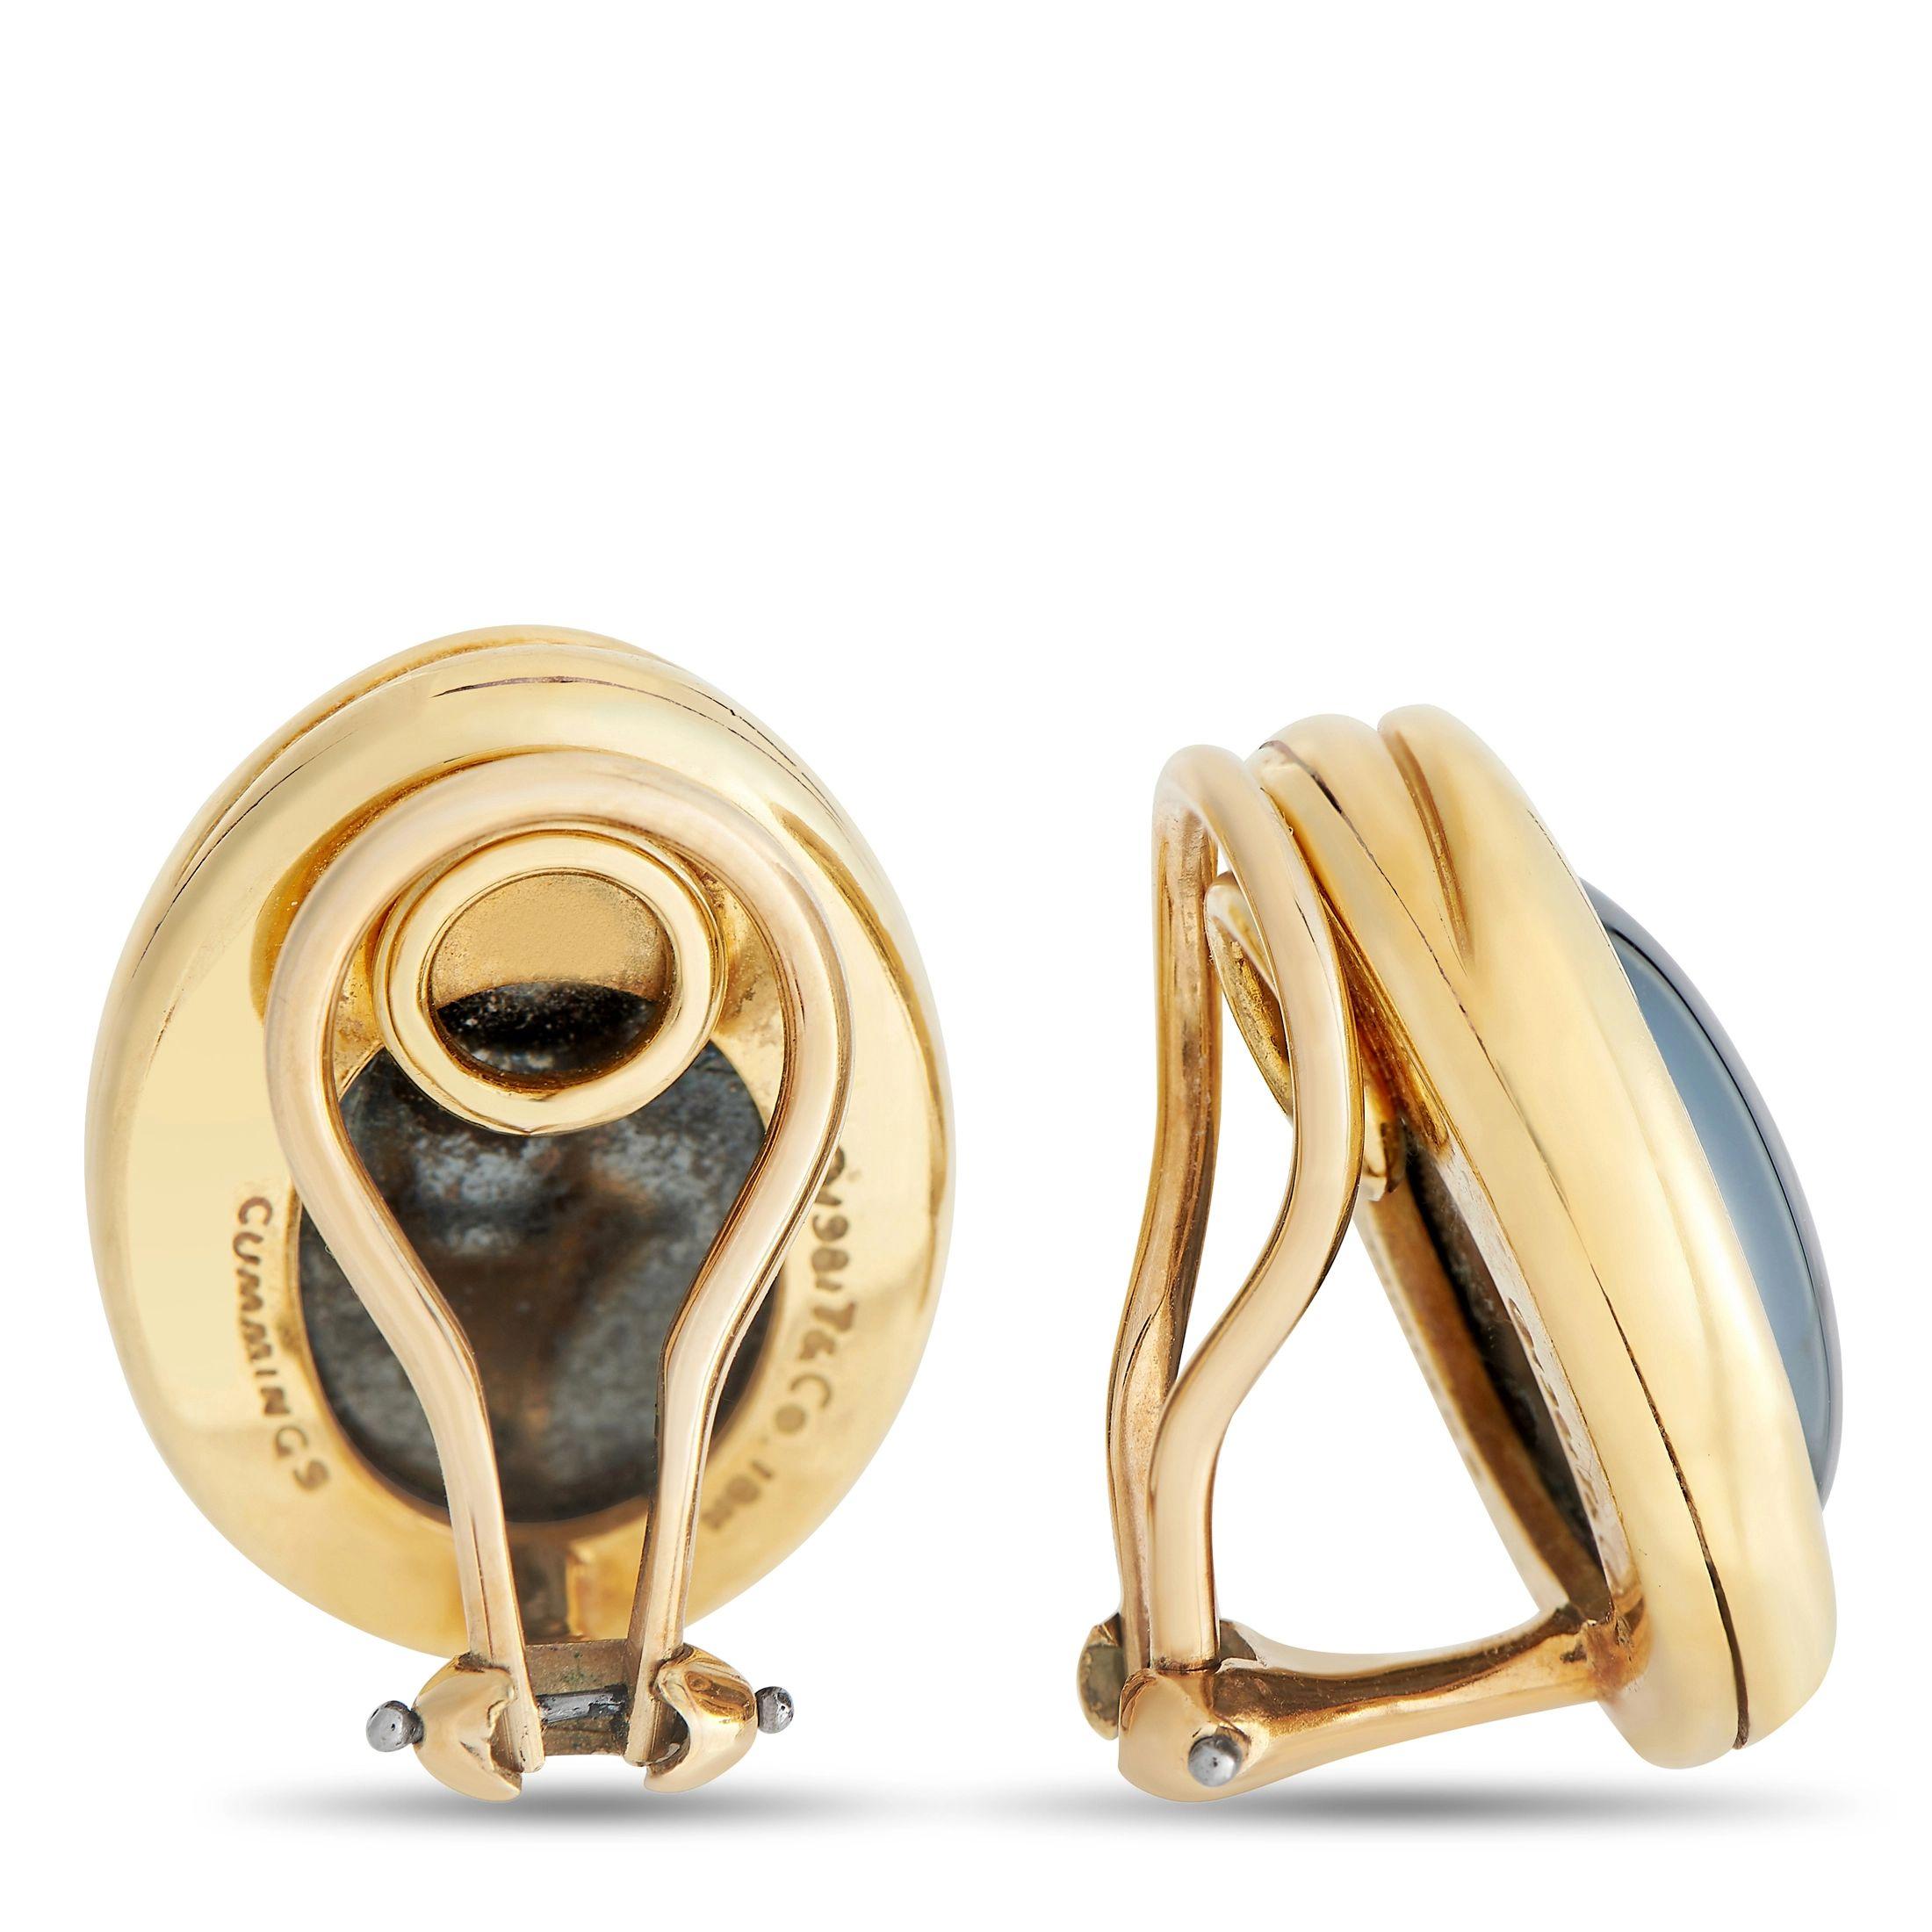 These Tiffany & Co. Angela Cummings have a minimalist aesthetic that will never go out of style. At the center of the oval-shaped 18K Yellow Gold setting, polished Hematite stones serve as a stunning focal point. Each one measures 0.75” long, 0.65”